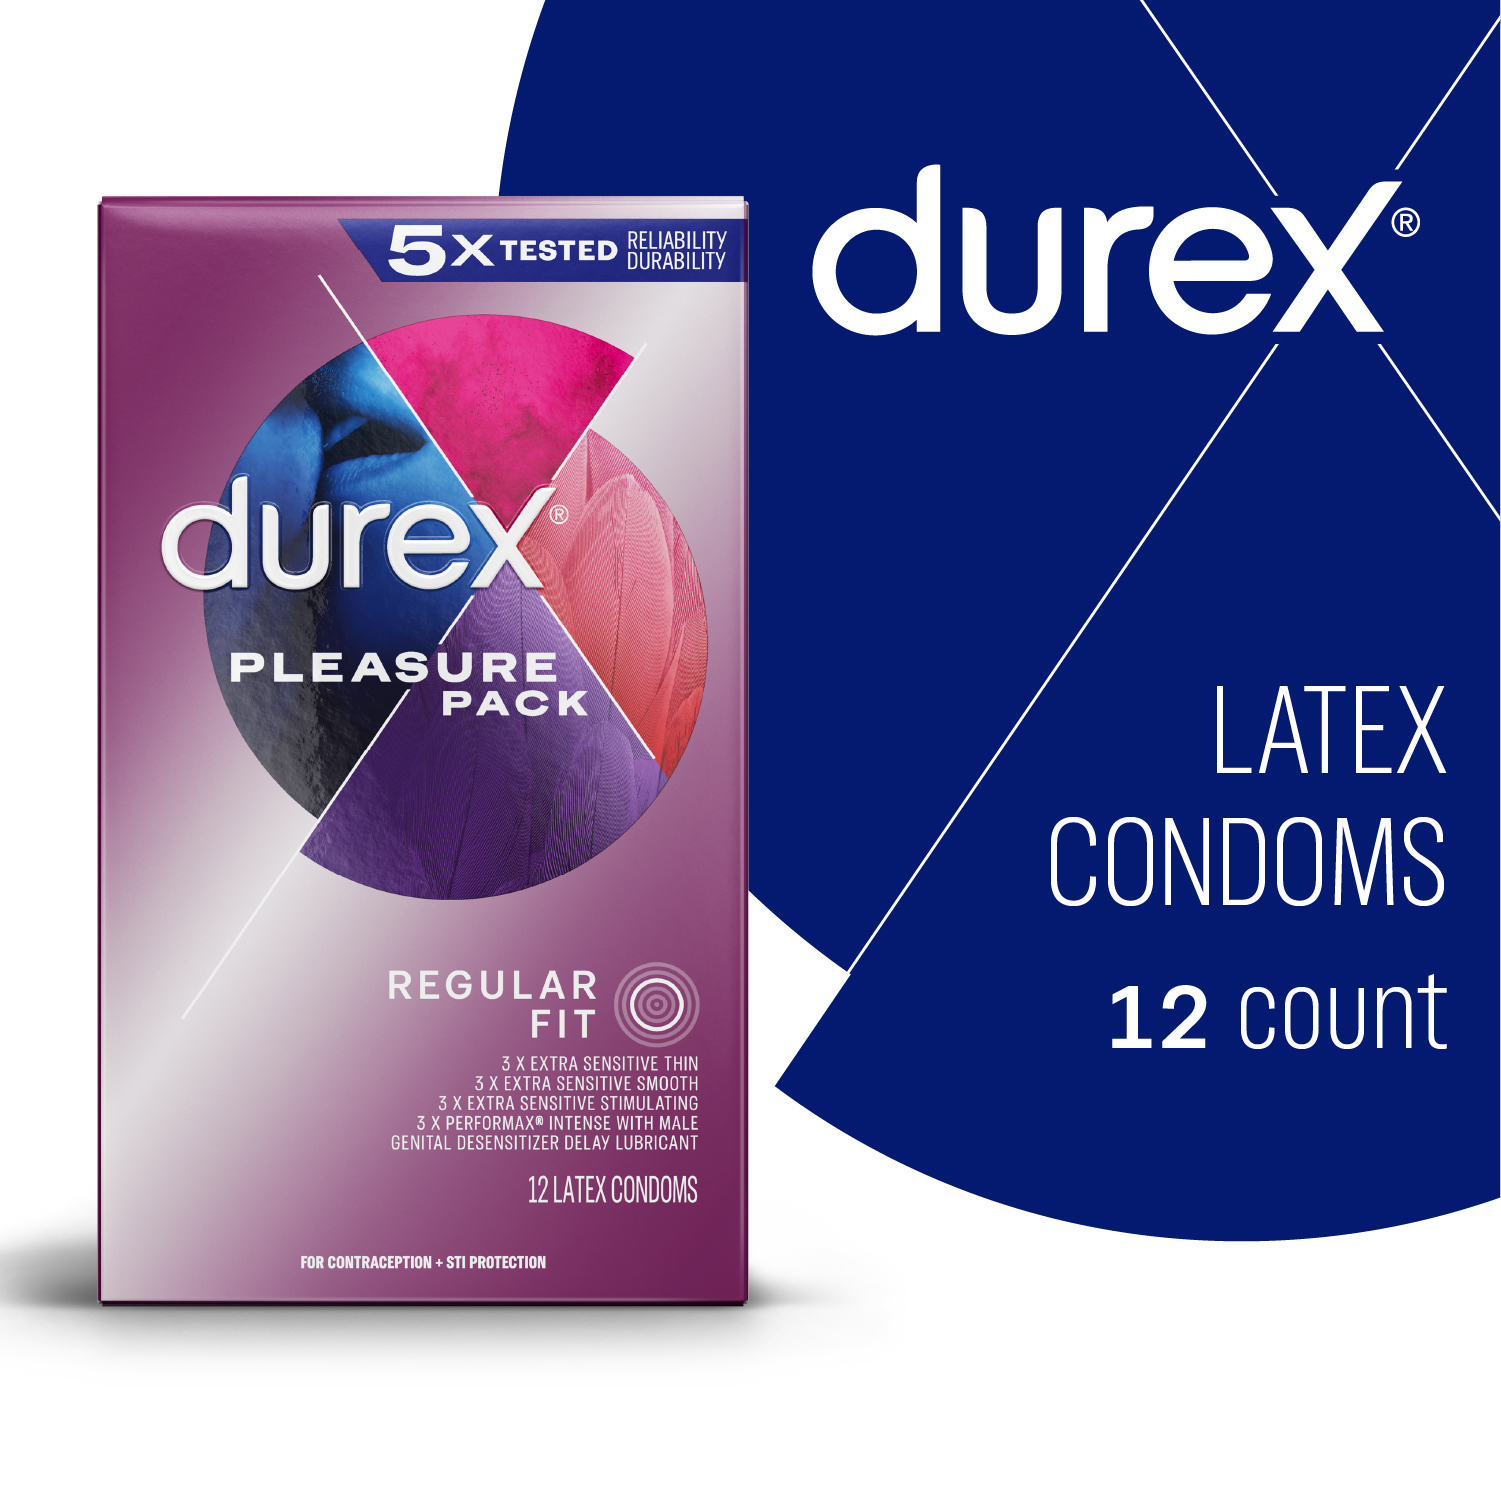 Durex Pleasure Pack Assorted Condoms, Exciting Mix of Sensation and Stimulation, Natural Rubber Latex Condoms for Men, FSA and HSA Eligible, 12 Count image